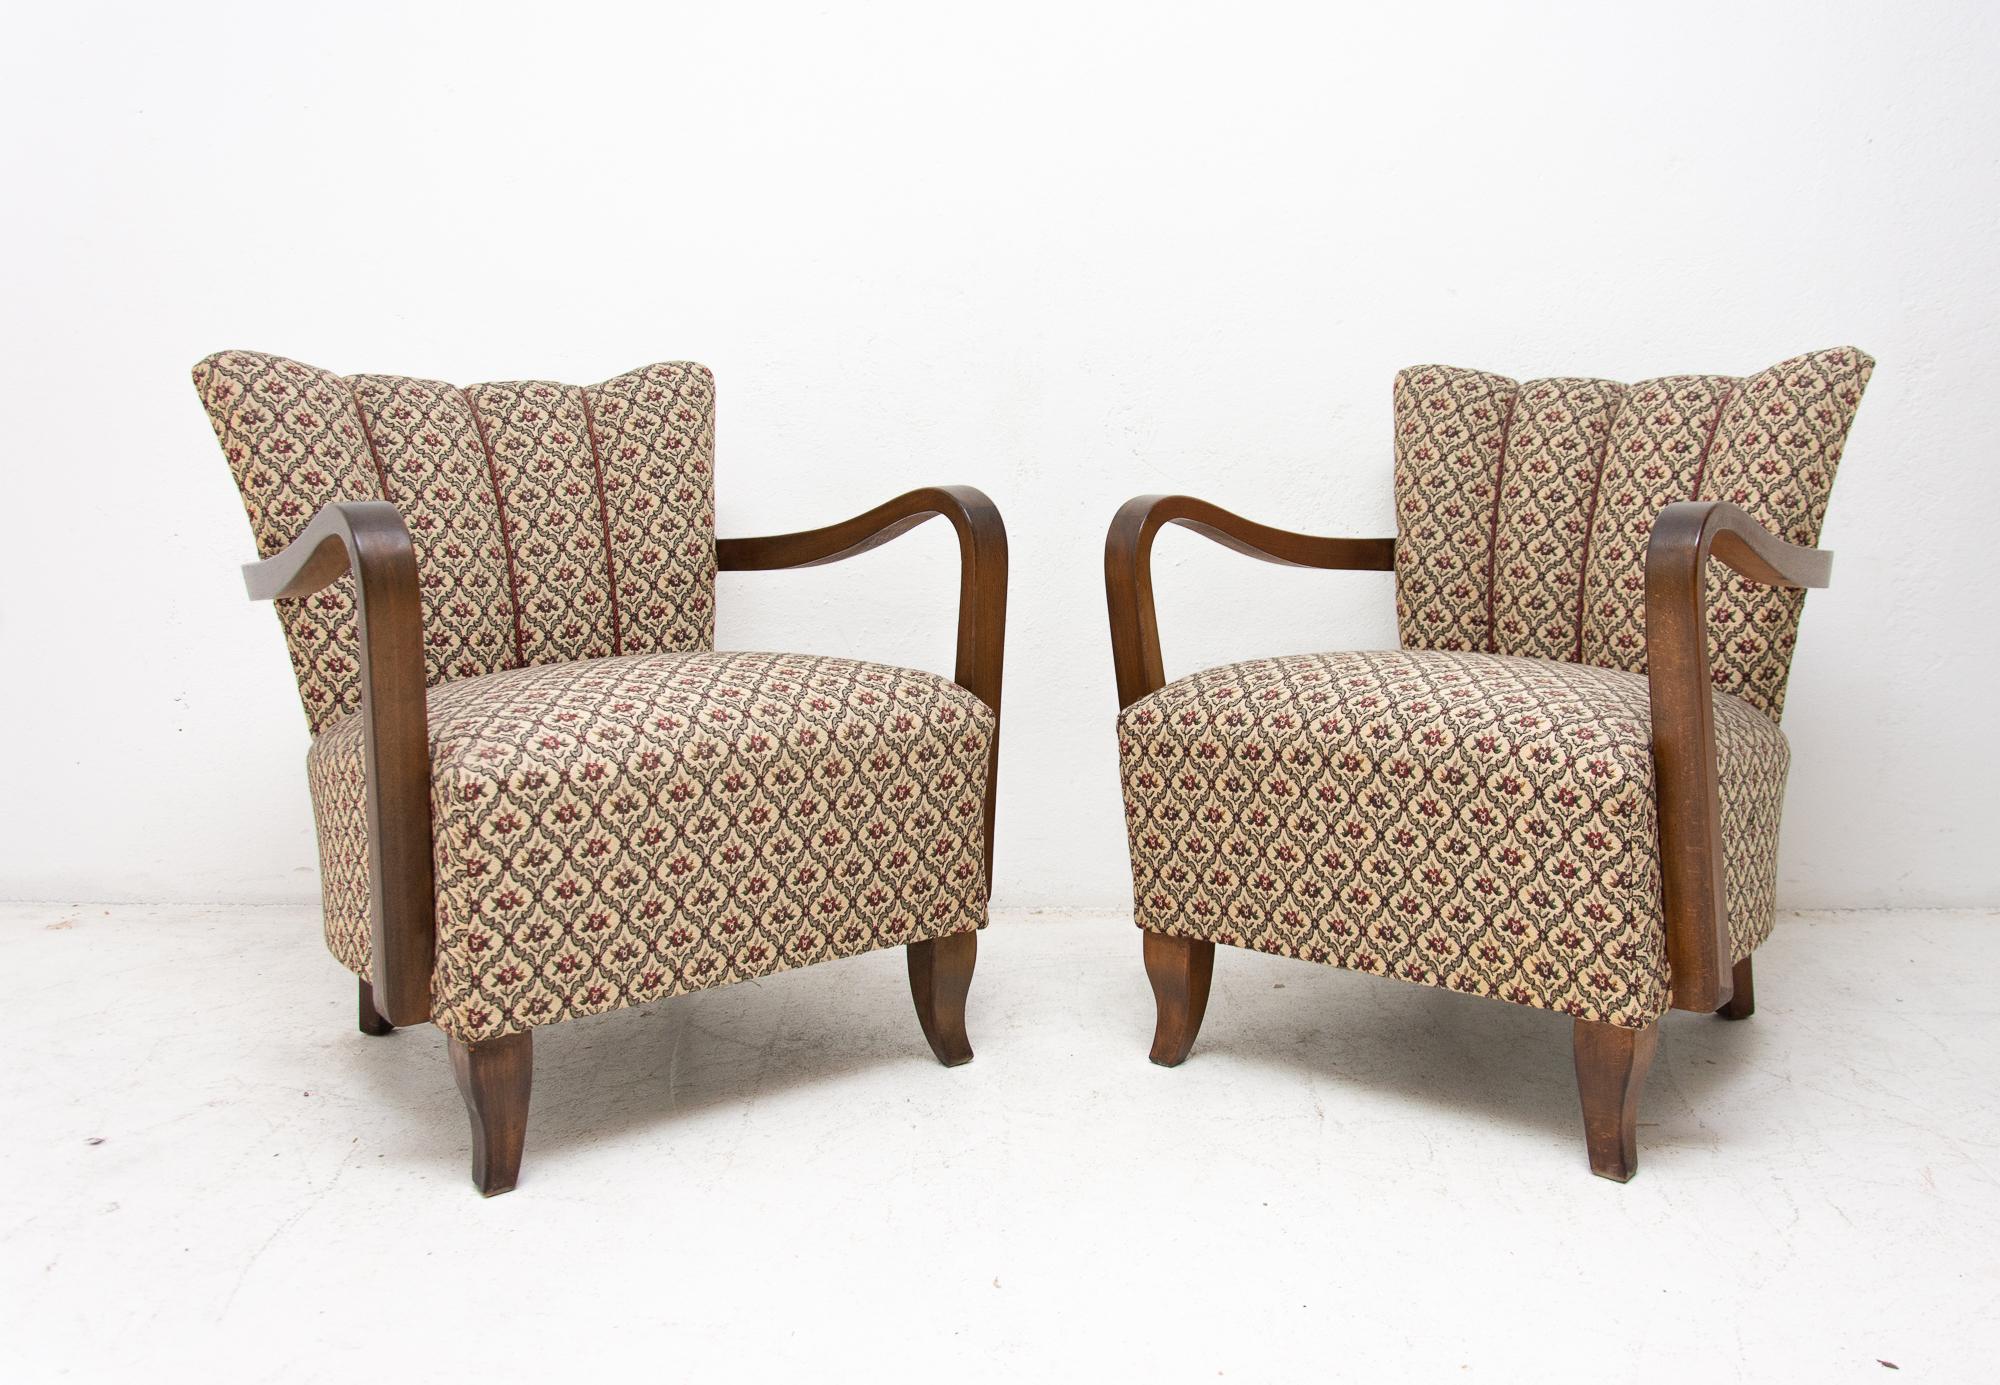 A pair of “cocktail” armchairs designed by Jindrich Halabala. Made in Czechoslovakia in the 1950s. Very interestingly shaped chairs. They features a beechwood structure and original upholstery. The chairs are in really very good vintage condition